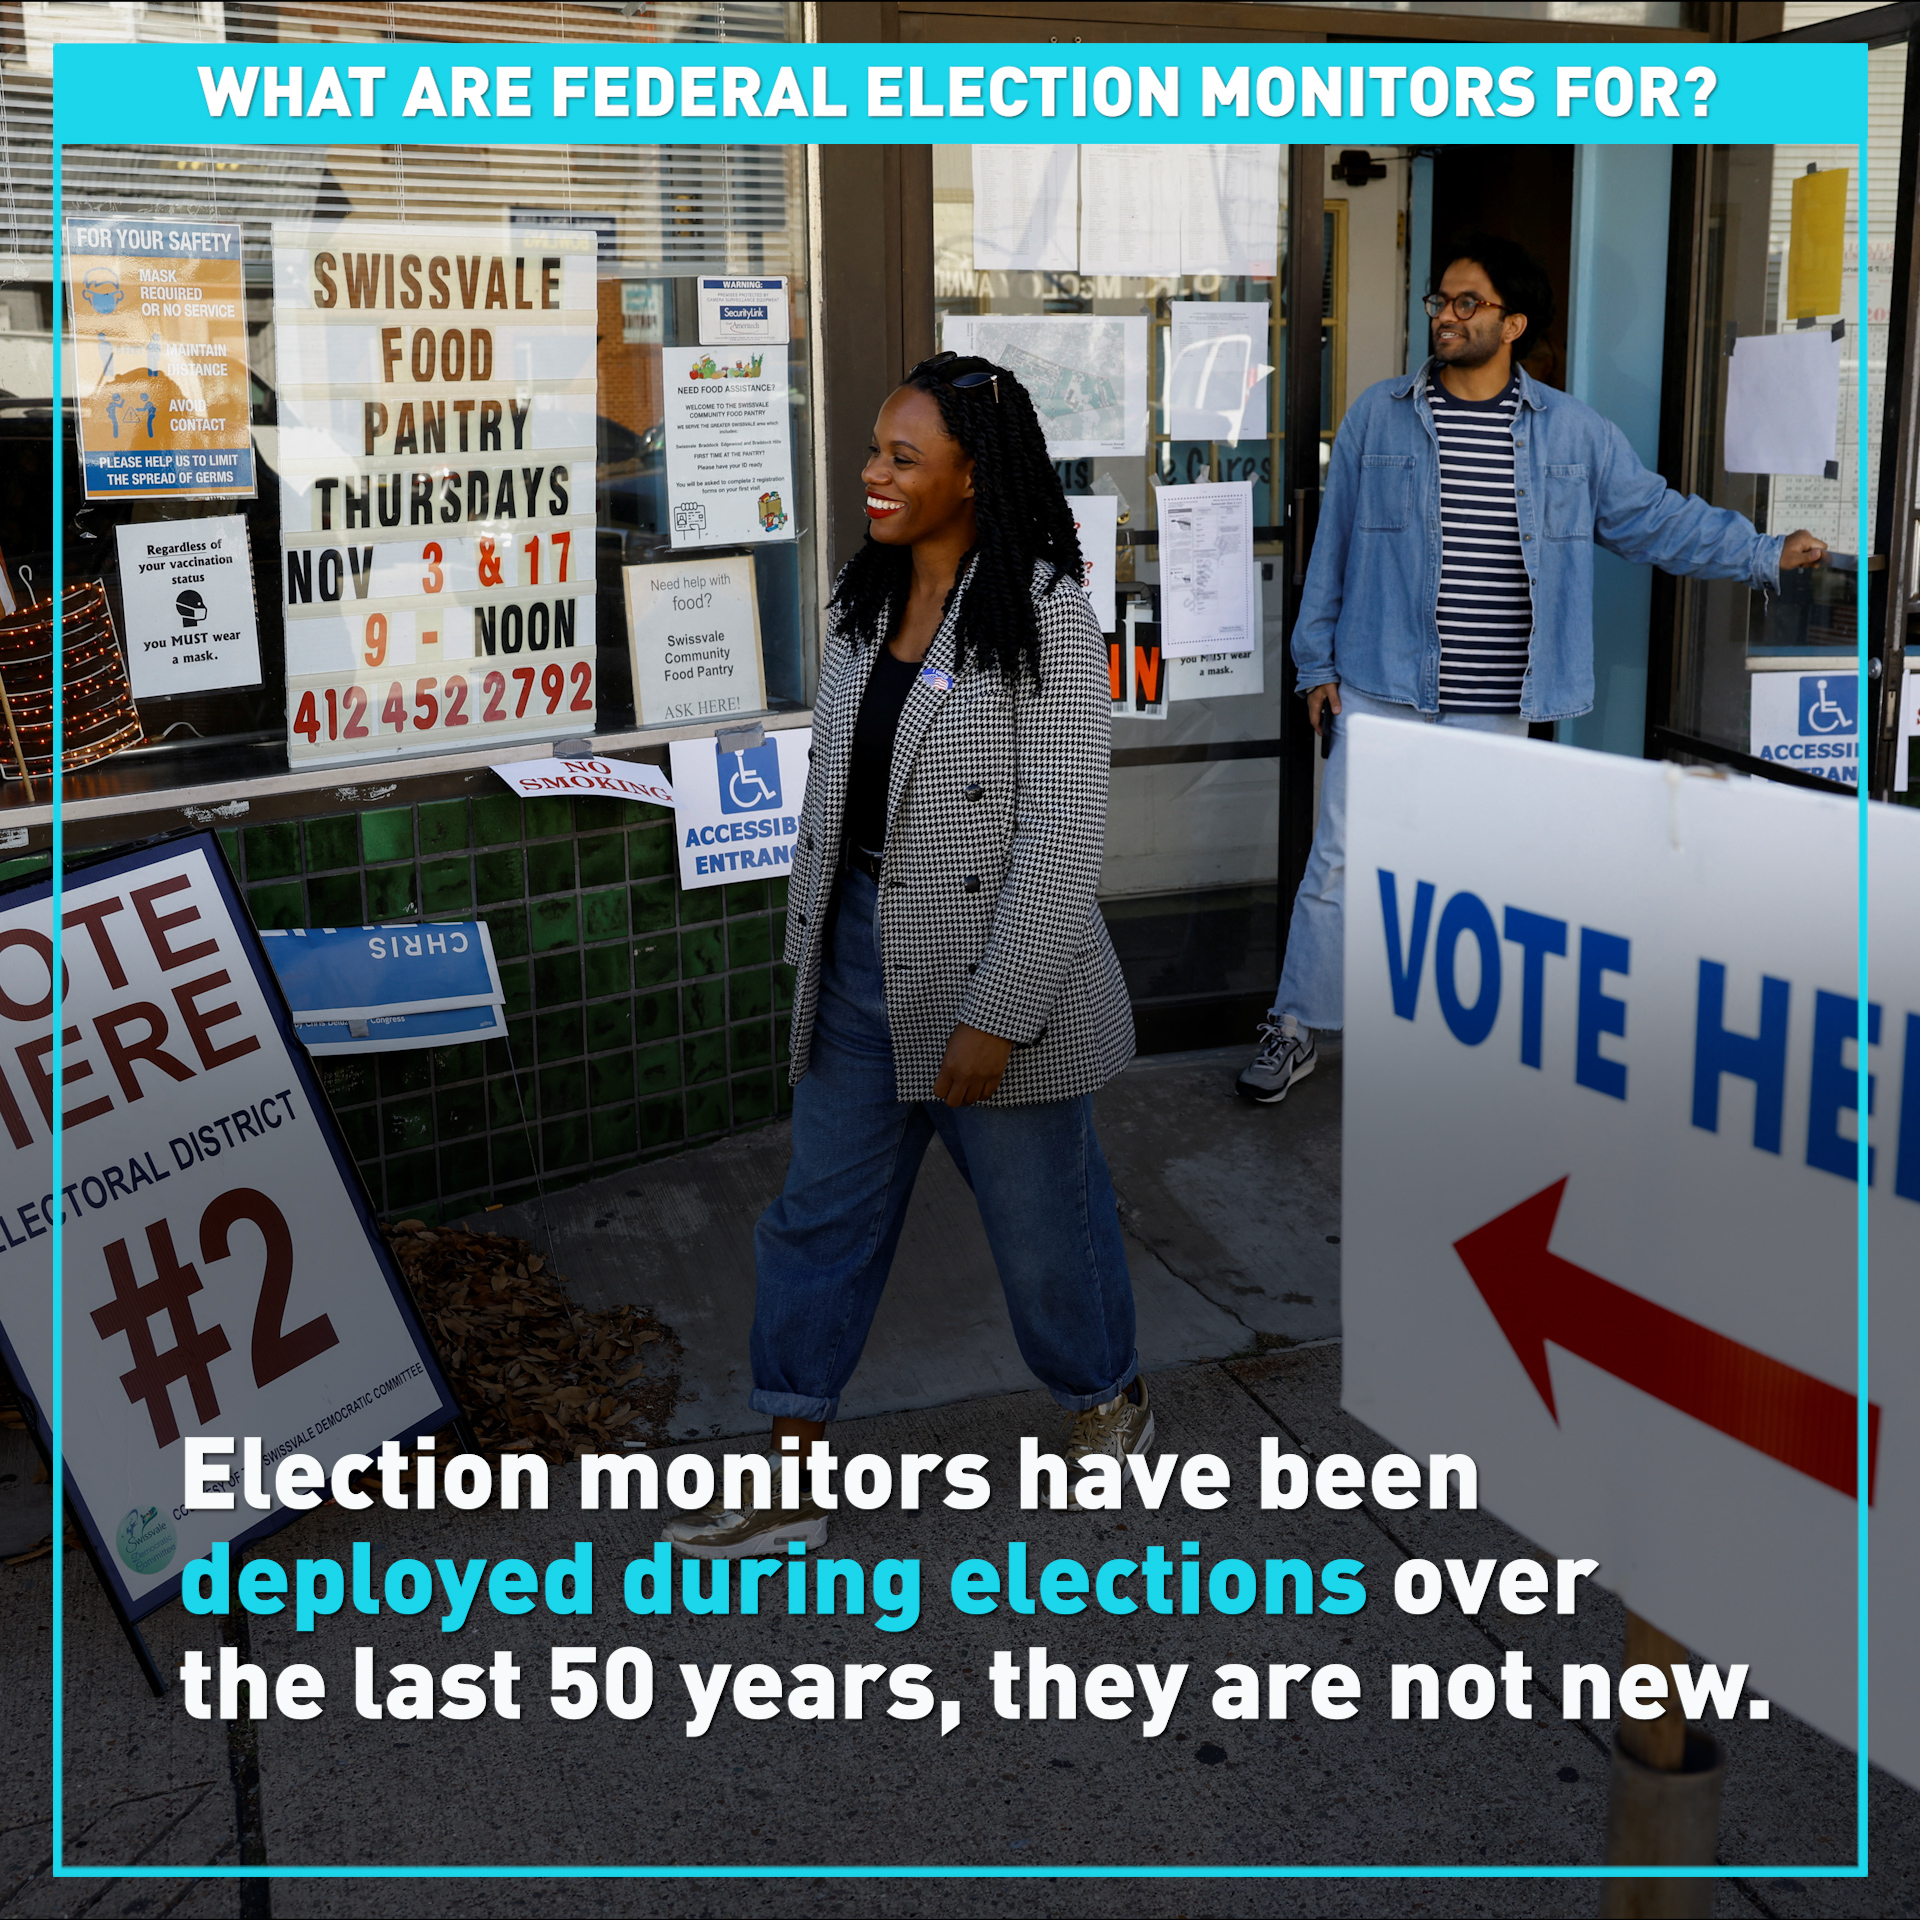 U.S. Department of Justice deploys election monitors to 24 states 